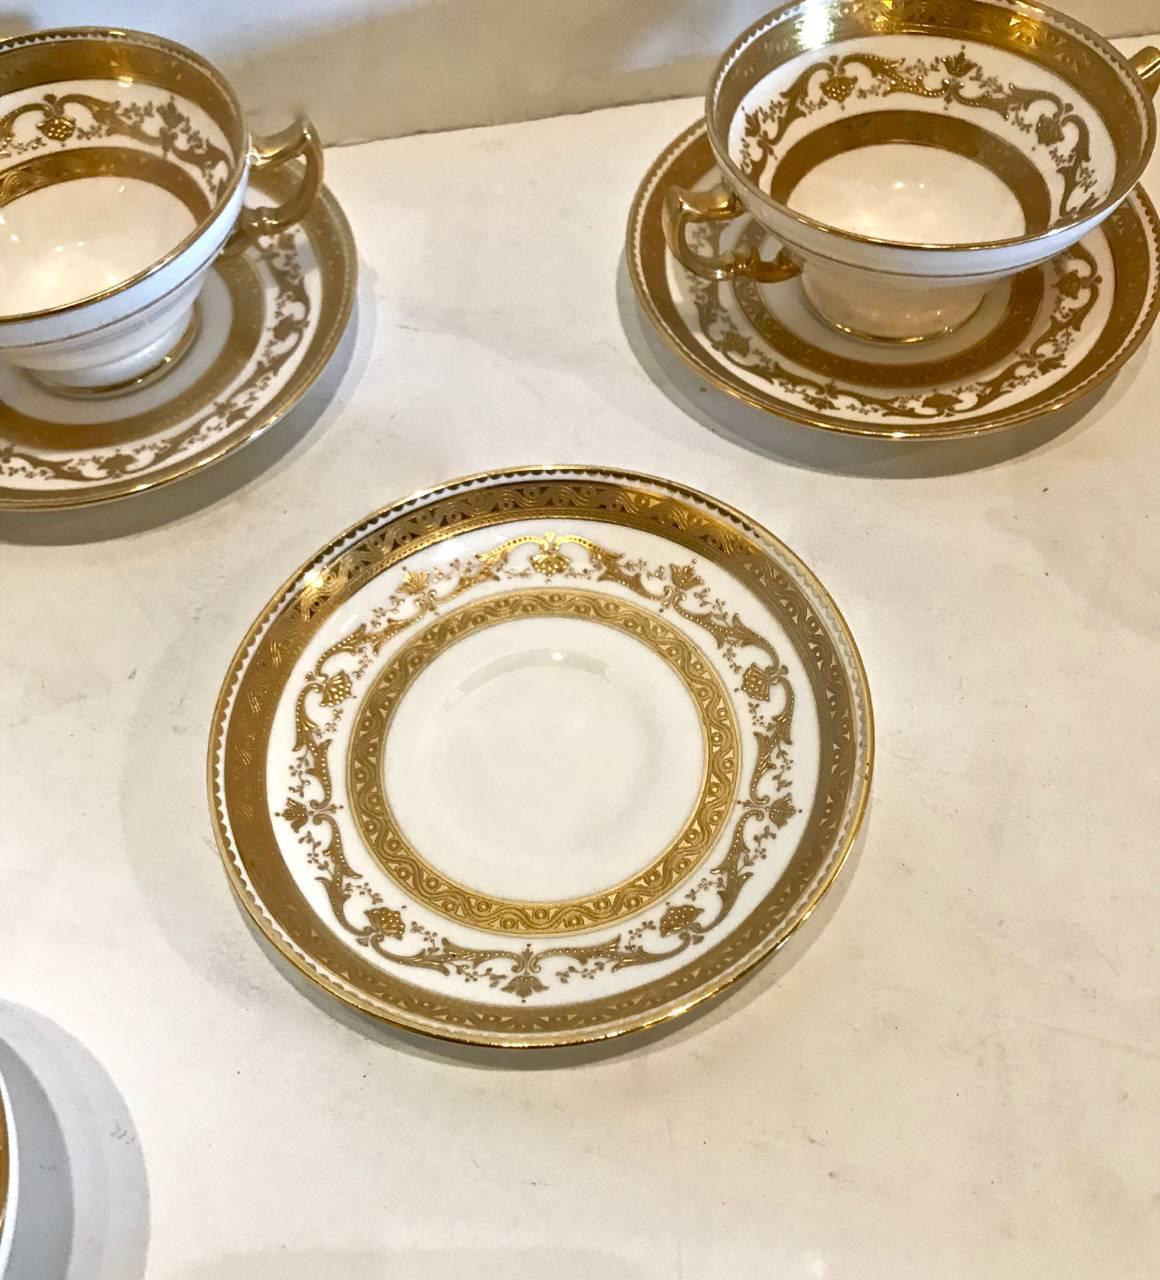 This is a beautifully heavily gilt decorated set of eight Minton Bouillon or cream soup cups and saucers that dates to the first half of the 20th century. The quality of Minton porcelain is exceptional and highly desirable. Three additional cups